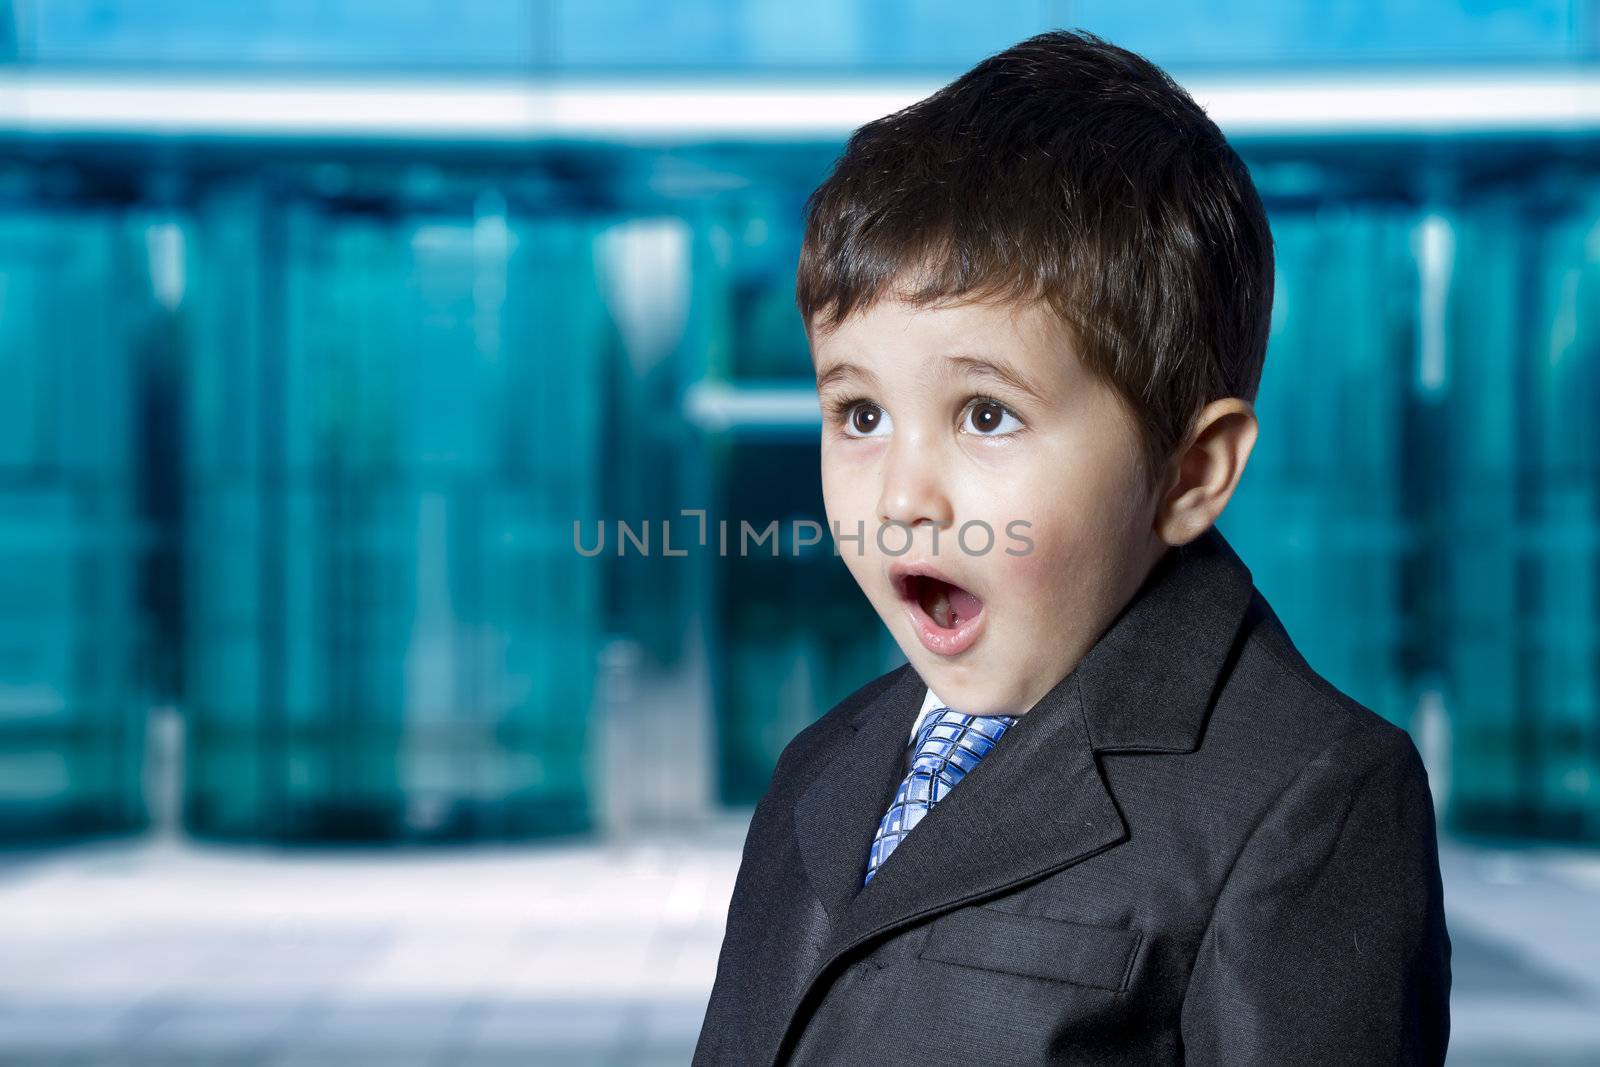 Stock Market. Surprised businessman child in suit with funny fac by FernandoCortes